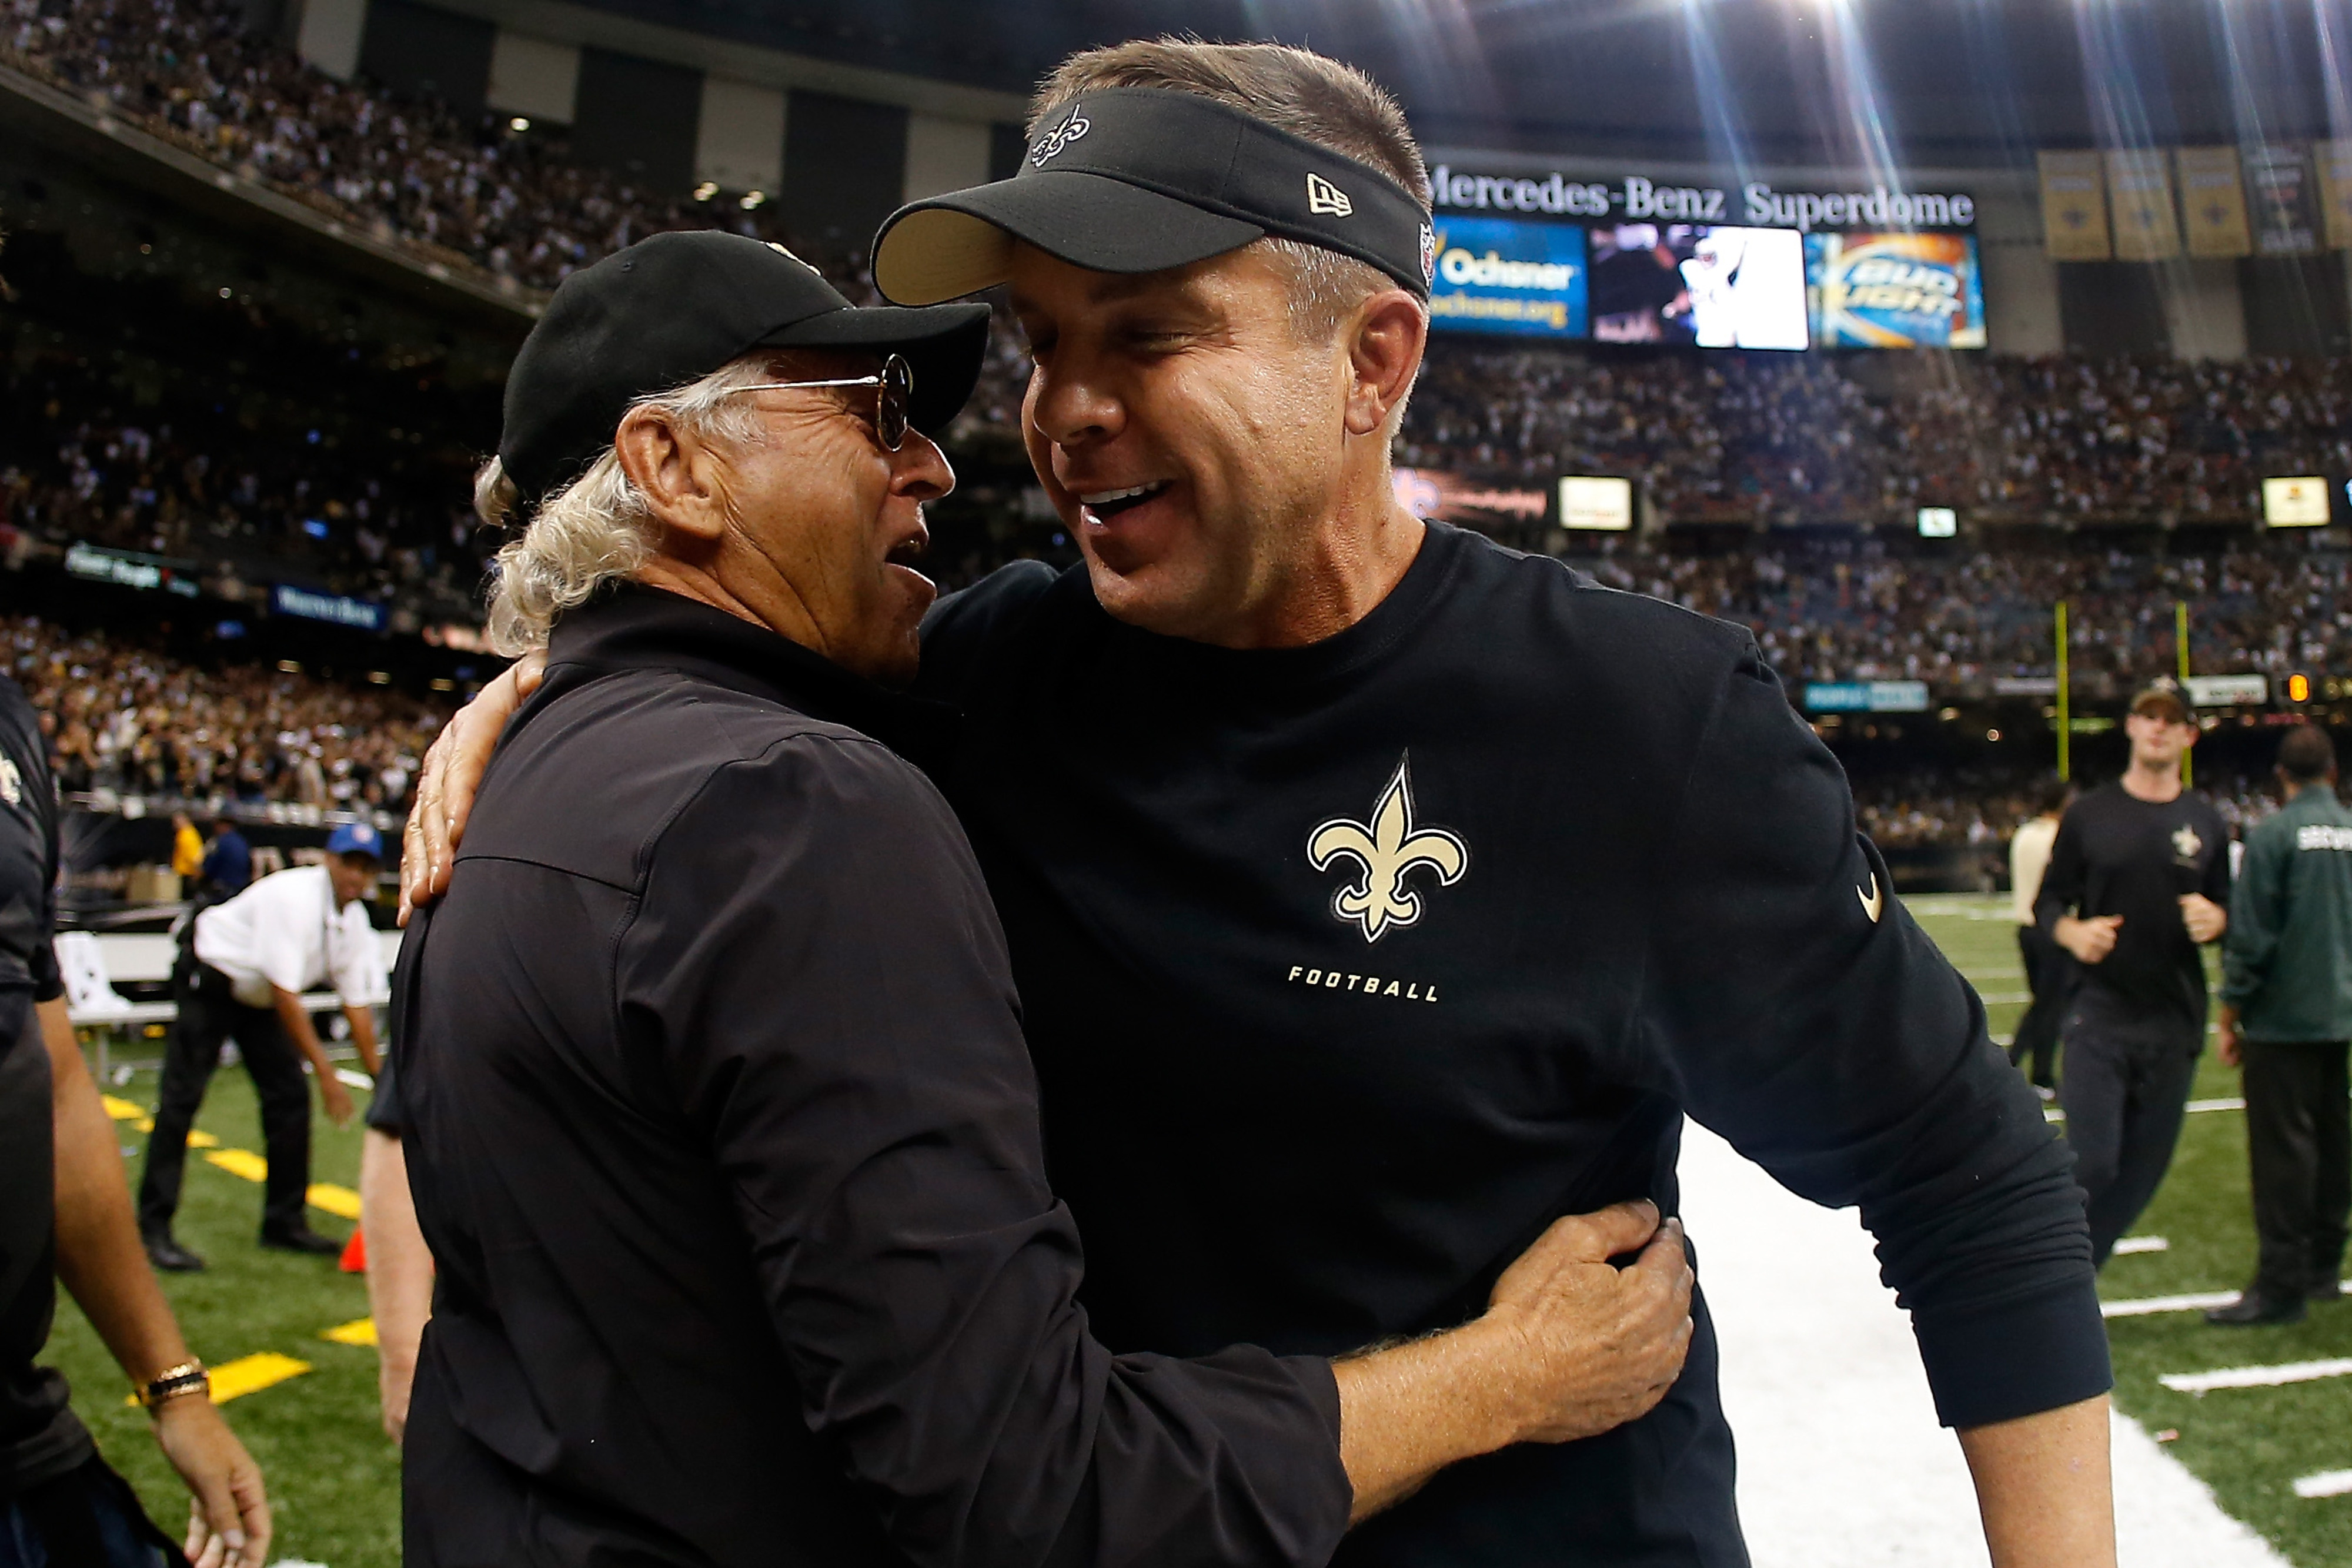 Sean Payton celebrates with Jimmy Buffett after defeating the Falcons on September 8, 2013